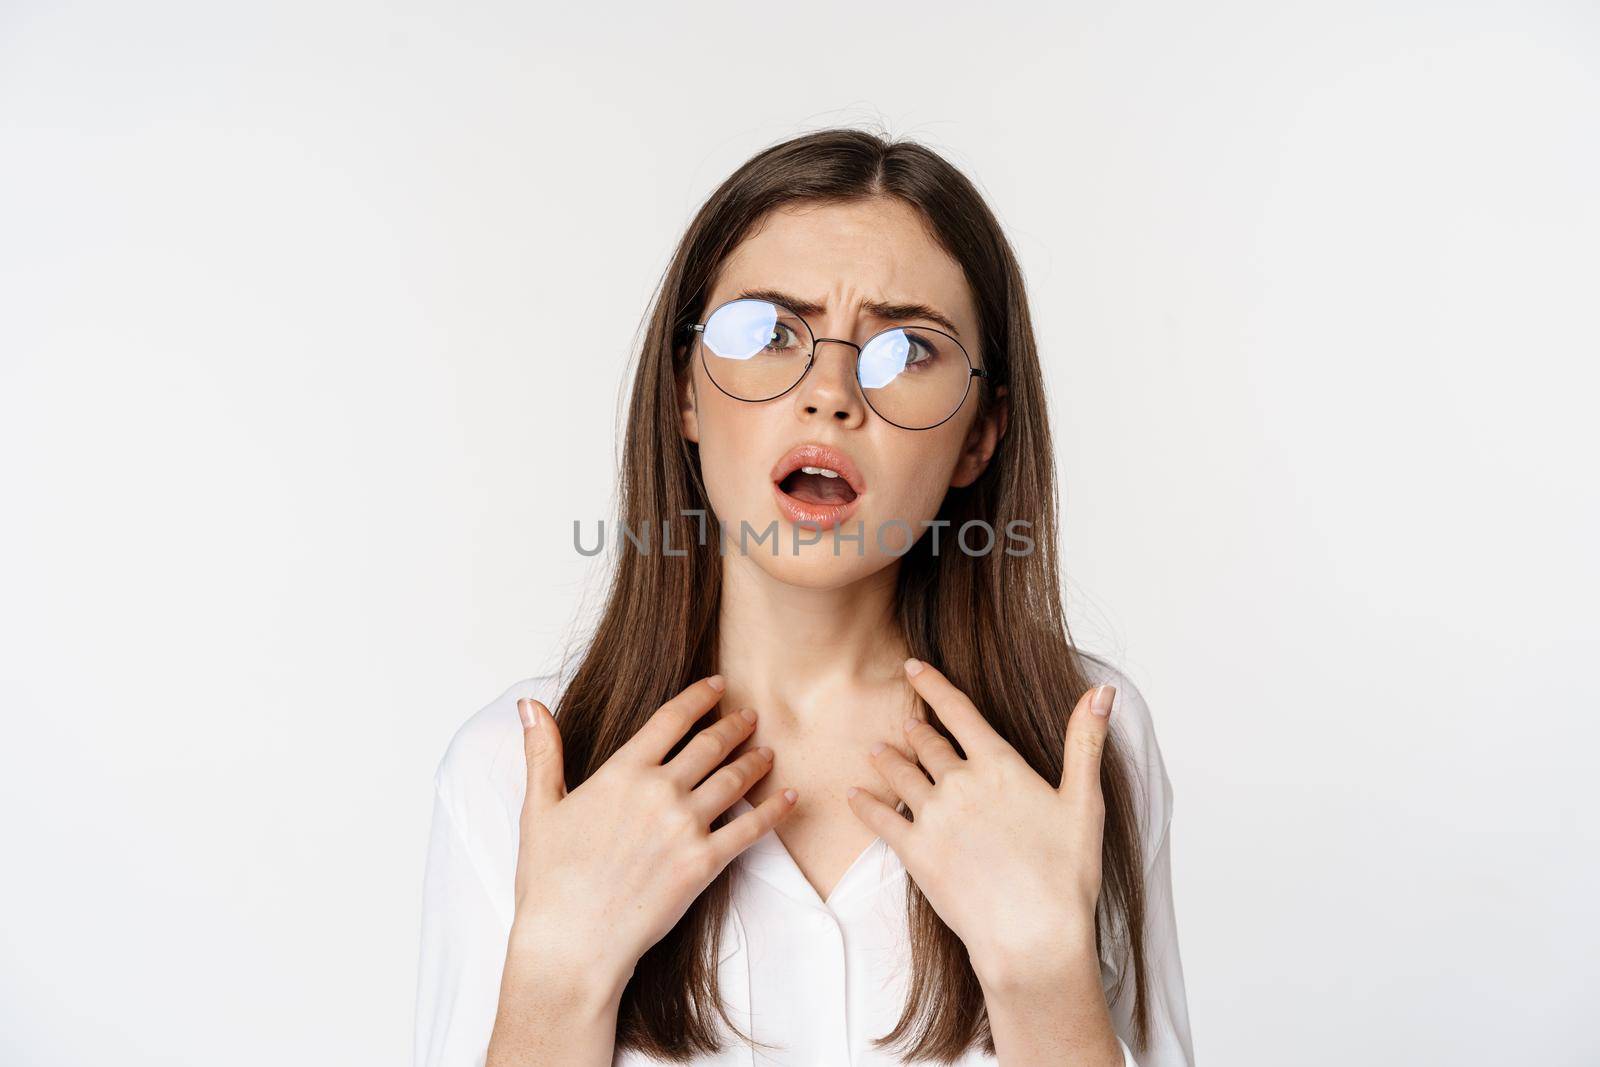 Offended and upset young woman in glasses, beeing jealous or disappointed, feeling hurt, grimacing and sulking, standing confused over white background.